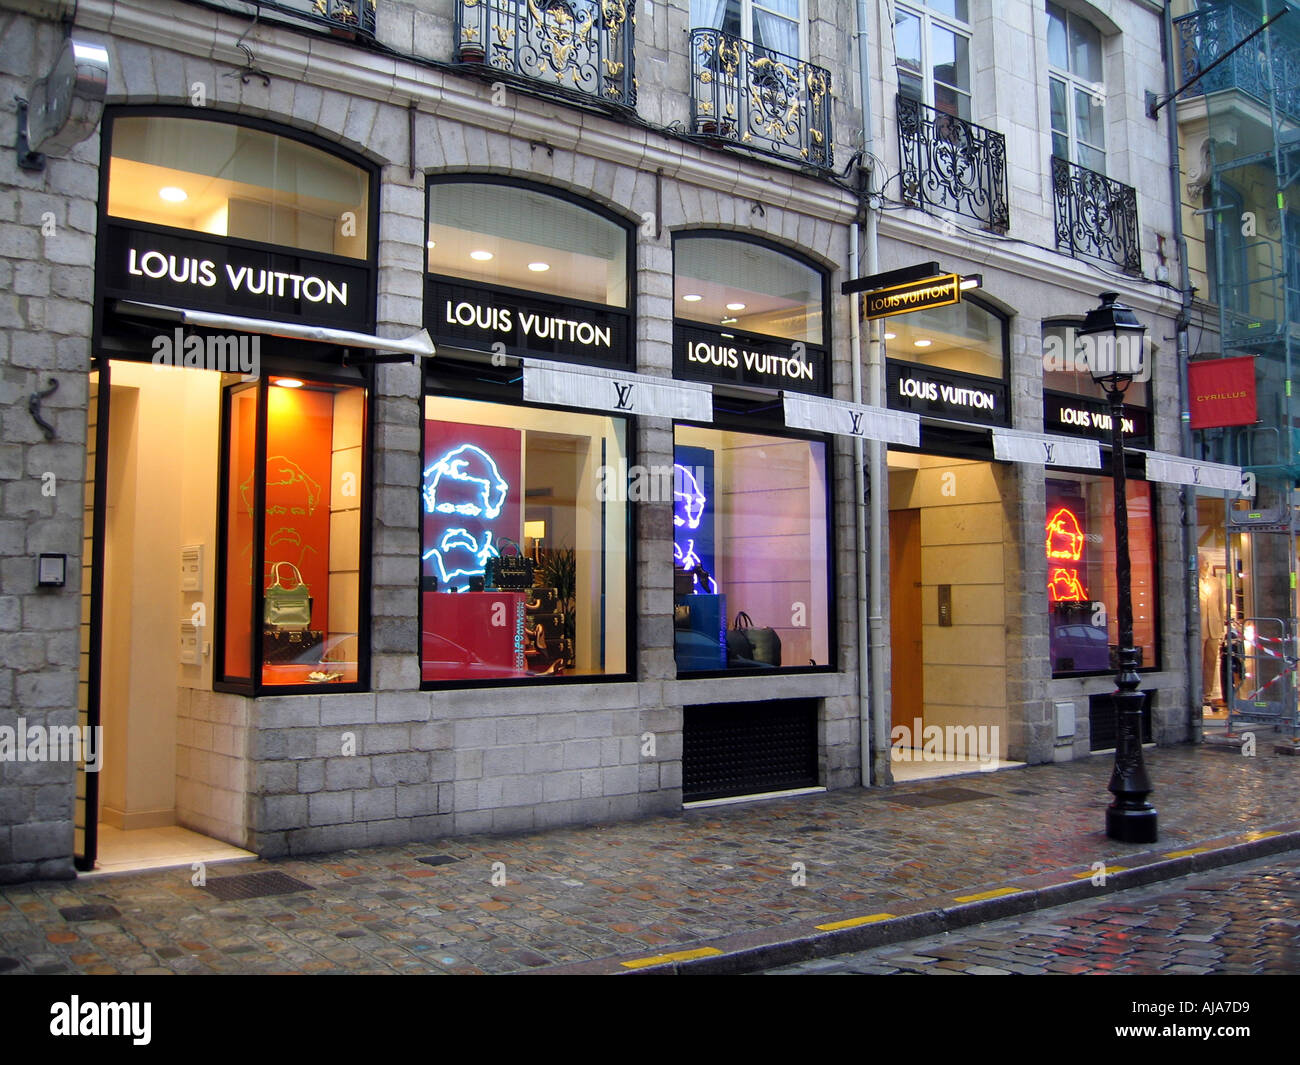 Lille Northern France Cultral Capital of Europe 2004 EU Louis Vuitton ...